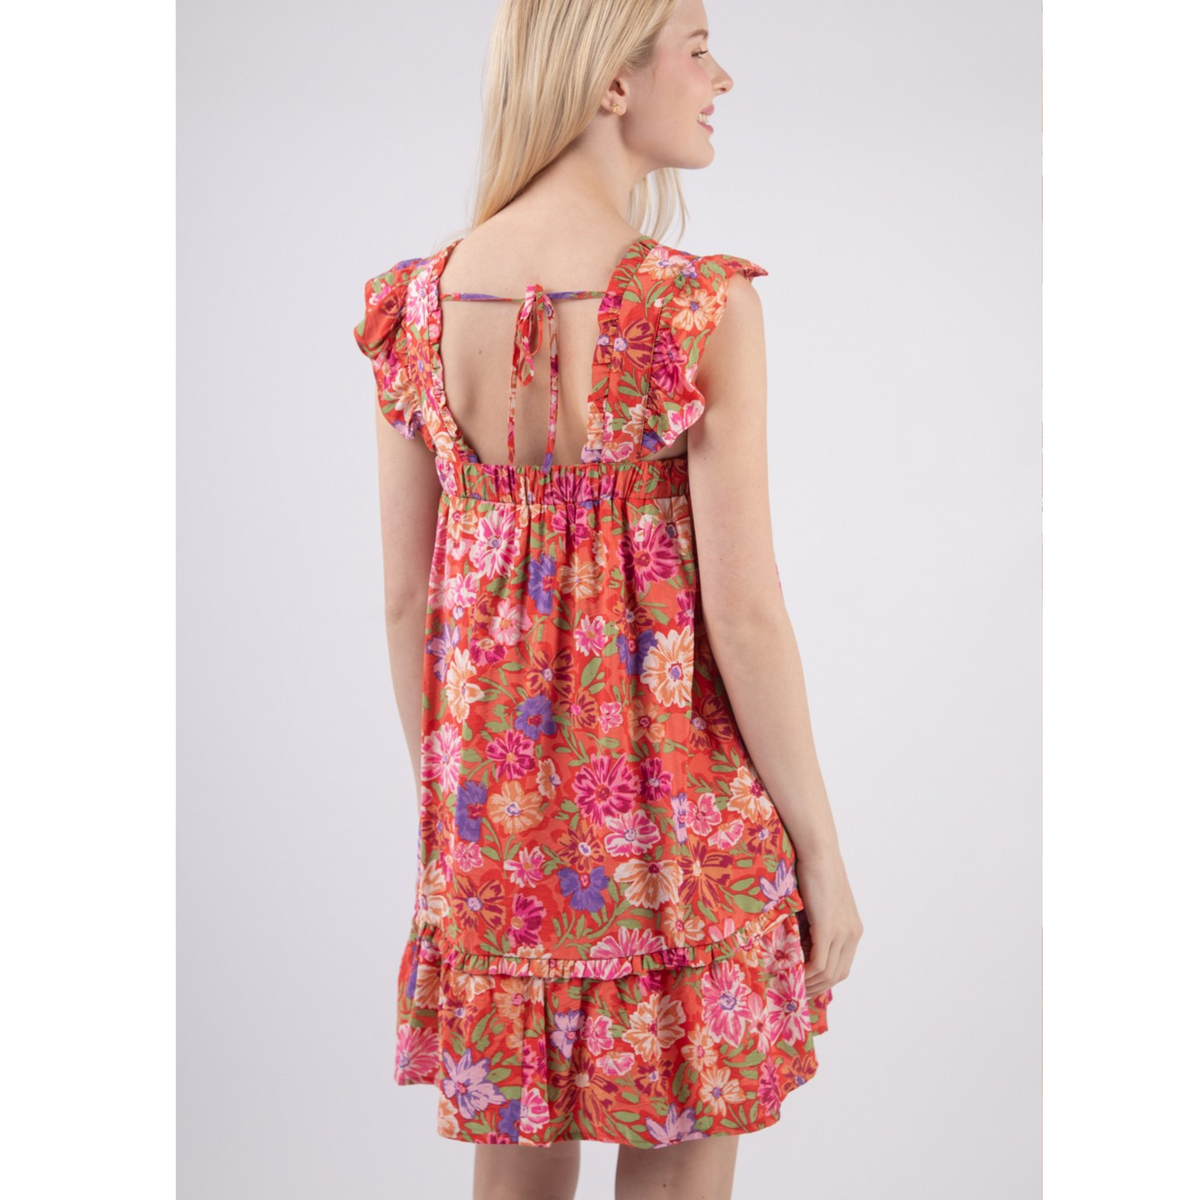 Fruit cocktail Dress Cap sleeve Dress with Tie Back